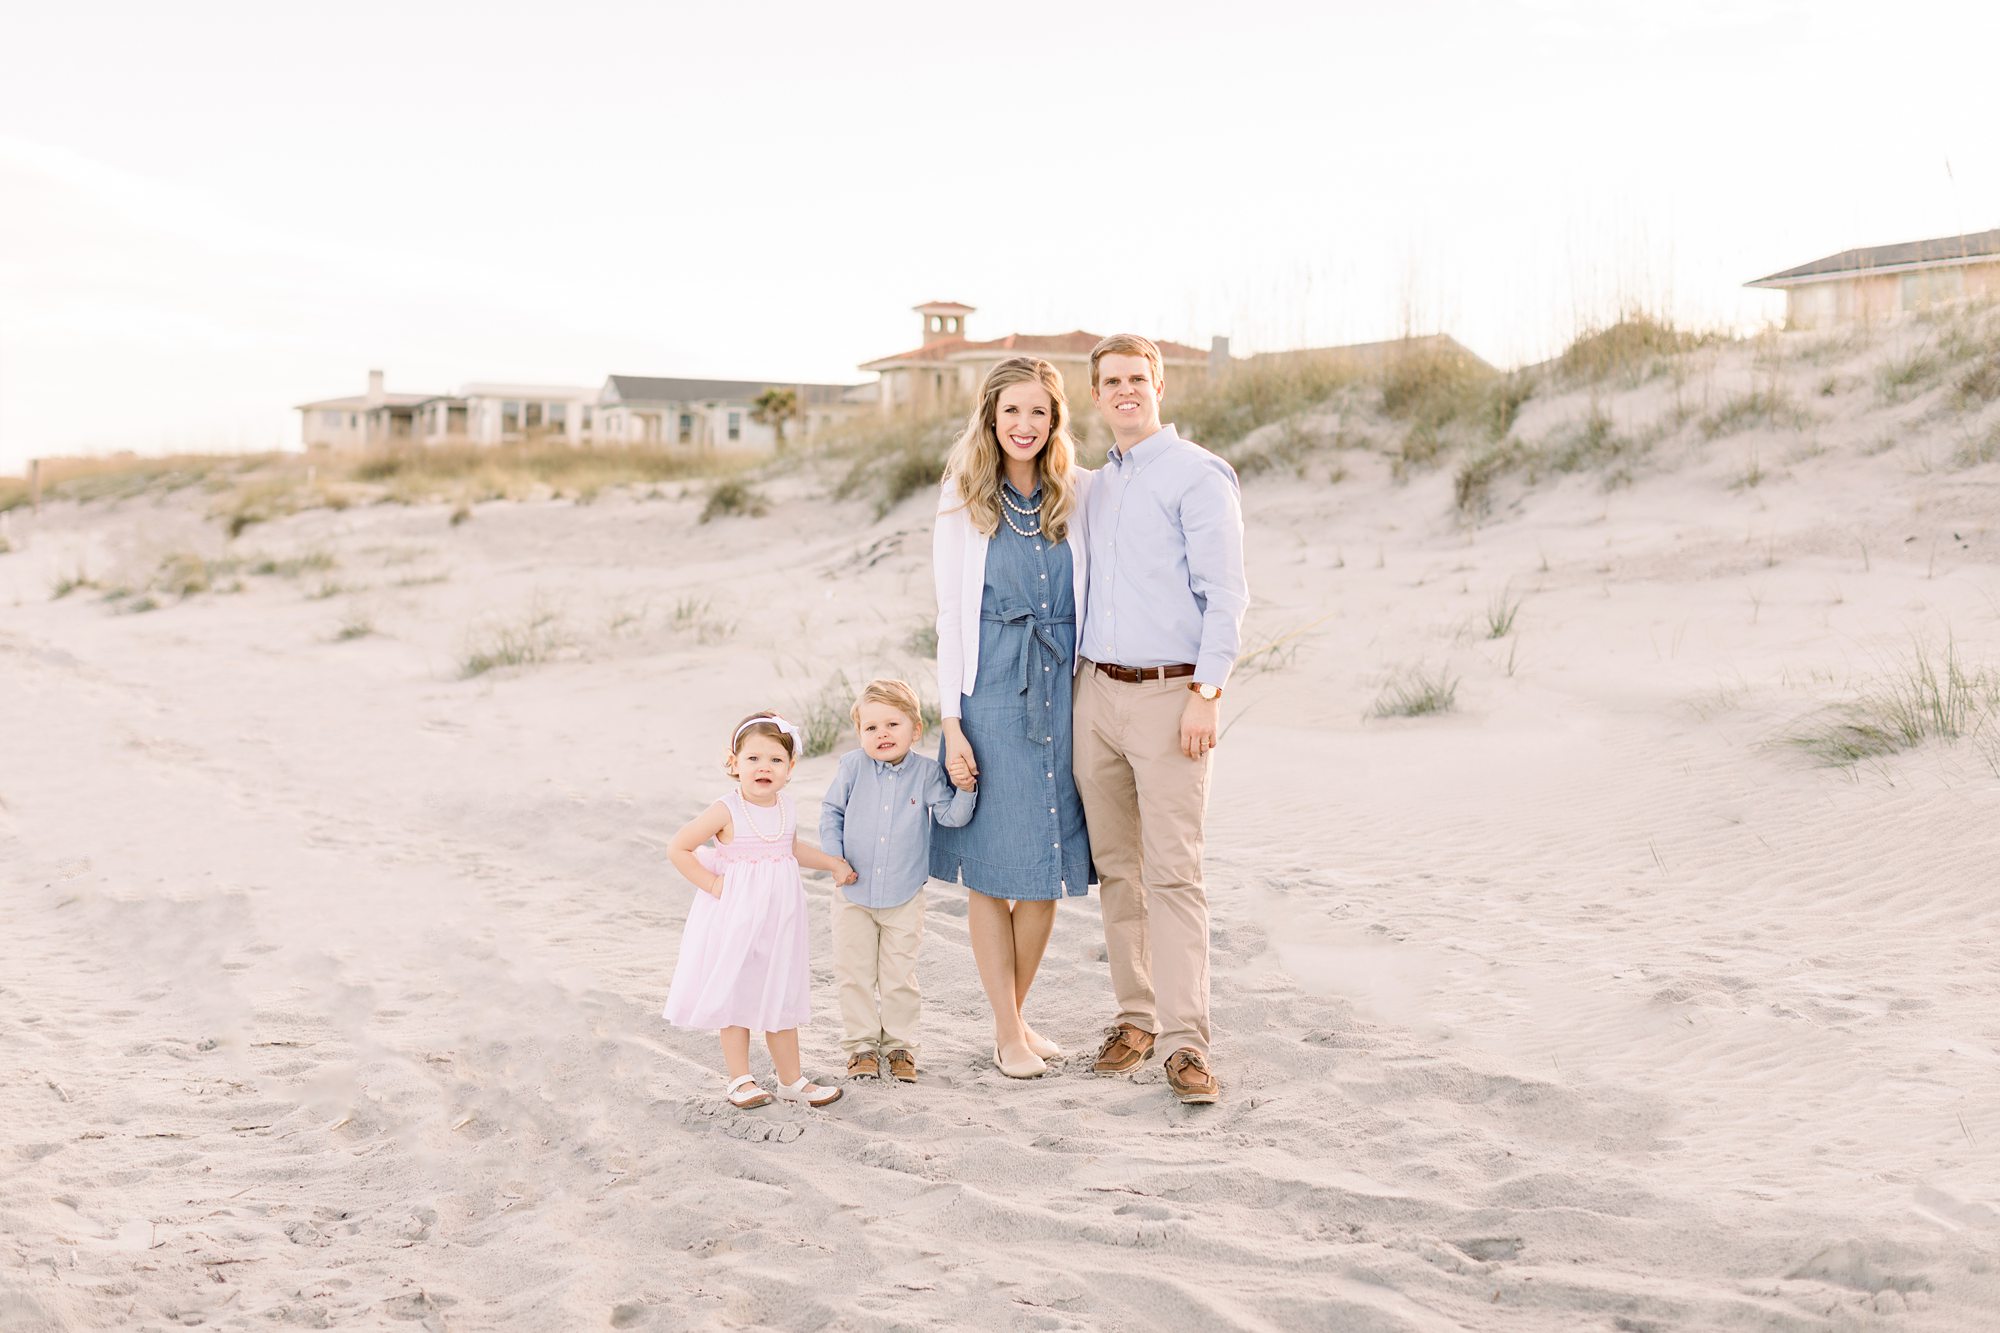 Jacksonville Wedding and Lifestyle Photographer, Brooke Images, Family Session, Beach Session